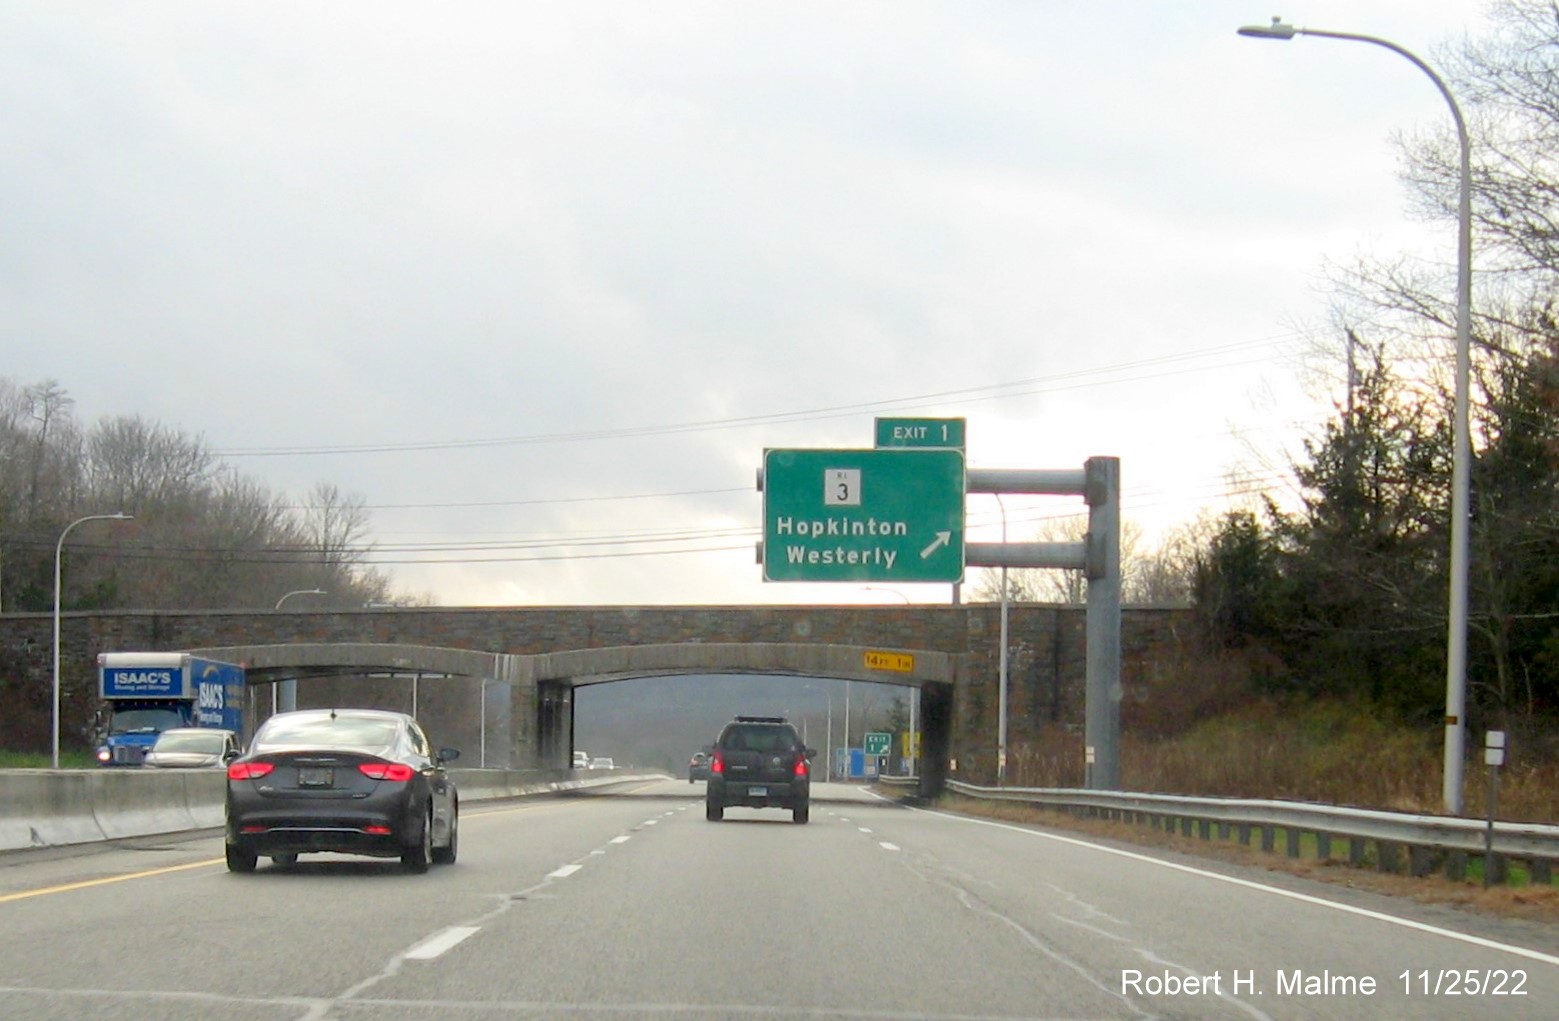 Image of overhead ramp sign for the RI 3 exit with unchanged exit number on I-95 South in Westerly, November 2022